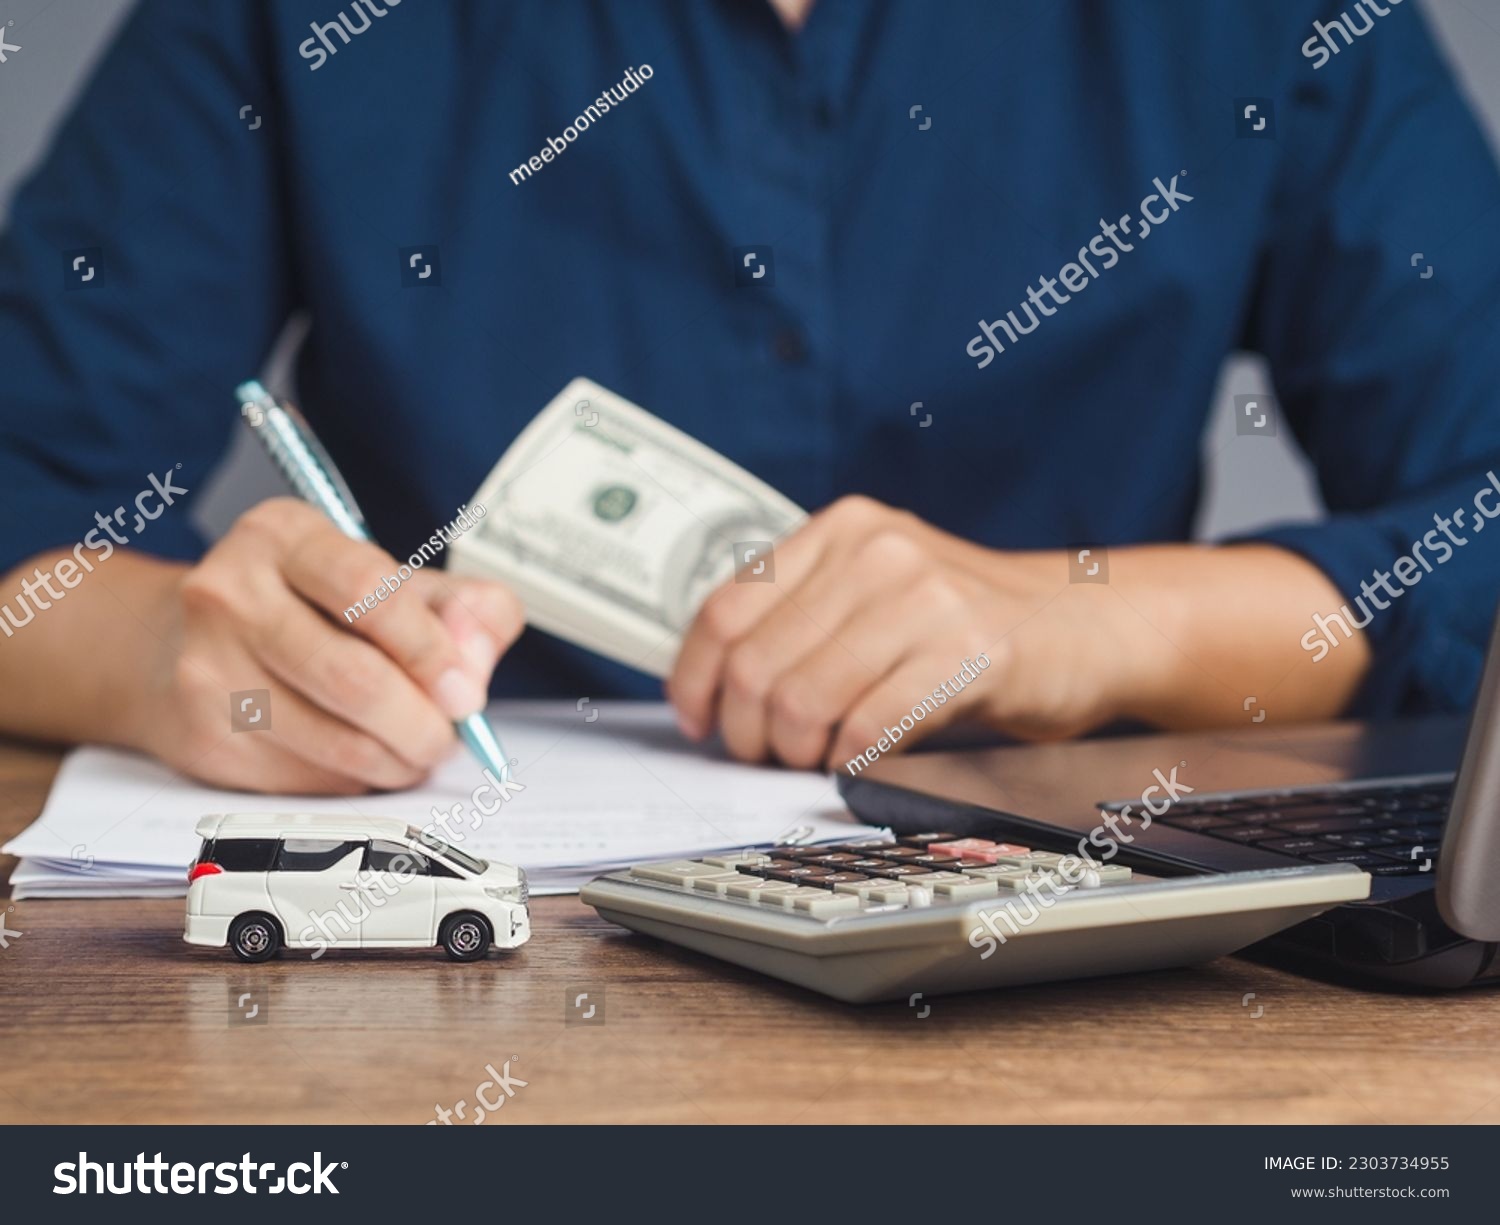 Car loan or Title loan. US dollar bills in a hand businessman while sitting at the table. Miniature a red car model, a calculator, and a laptop on a table. Car finance and insurance concept #2303734955